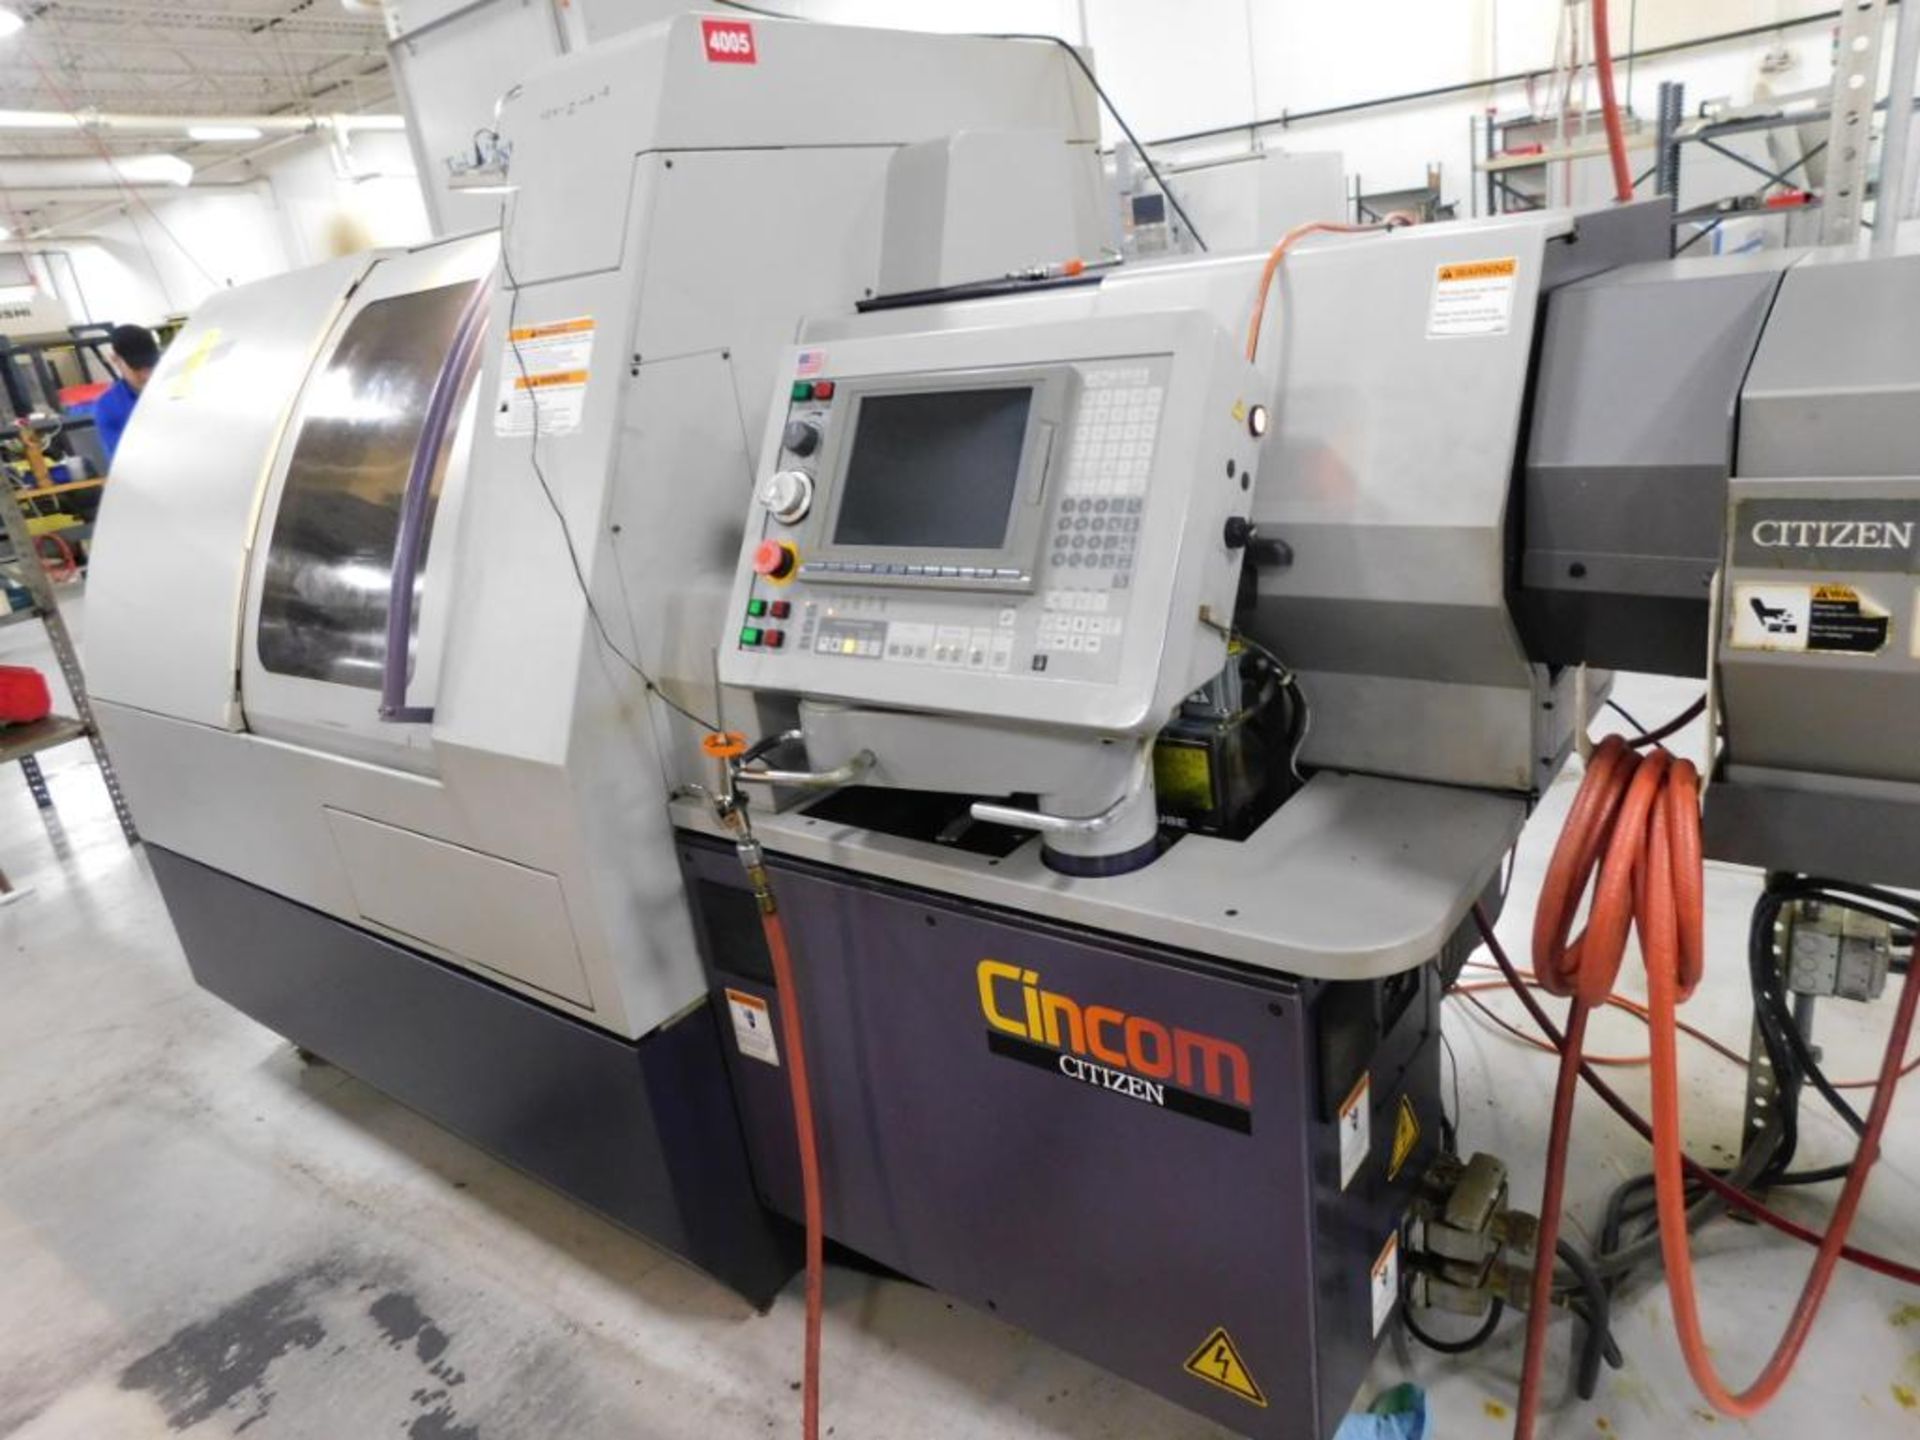 Citizen CNC Swiss Style Turning Center, Model Cincom C32 Type VIII, S/N E324-X12013 (2004), w/Citize - Image 4 of 8